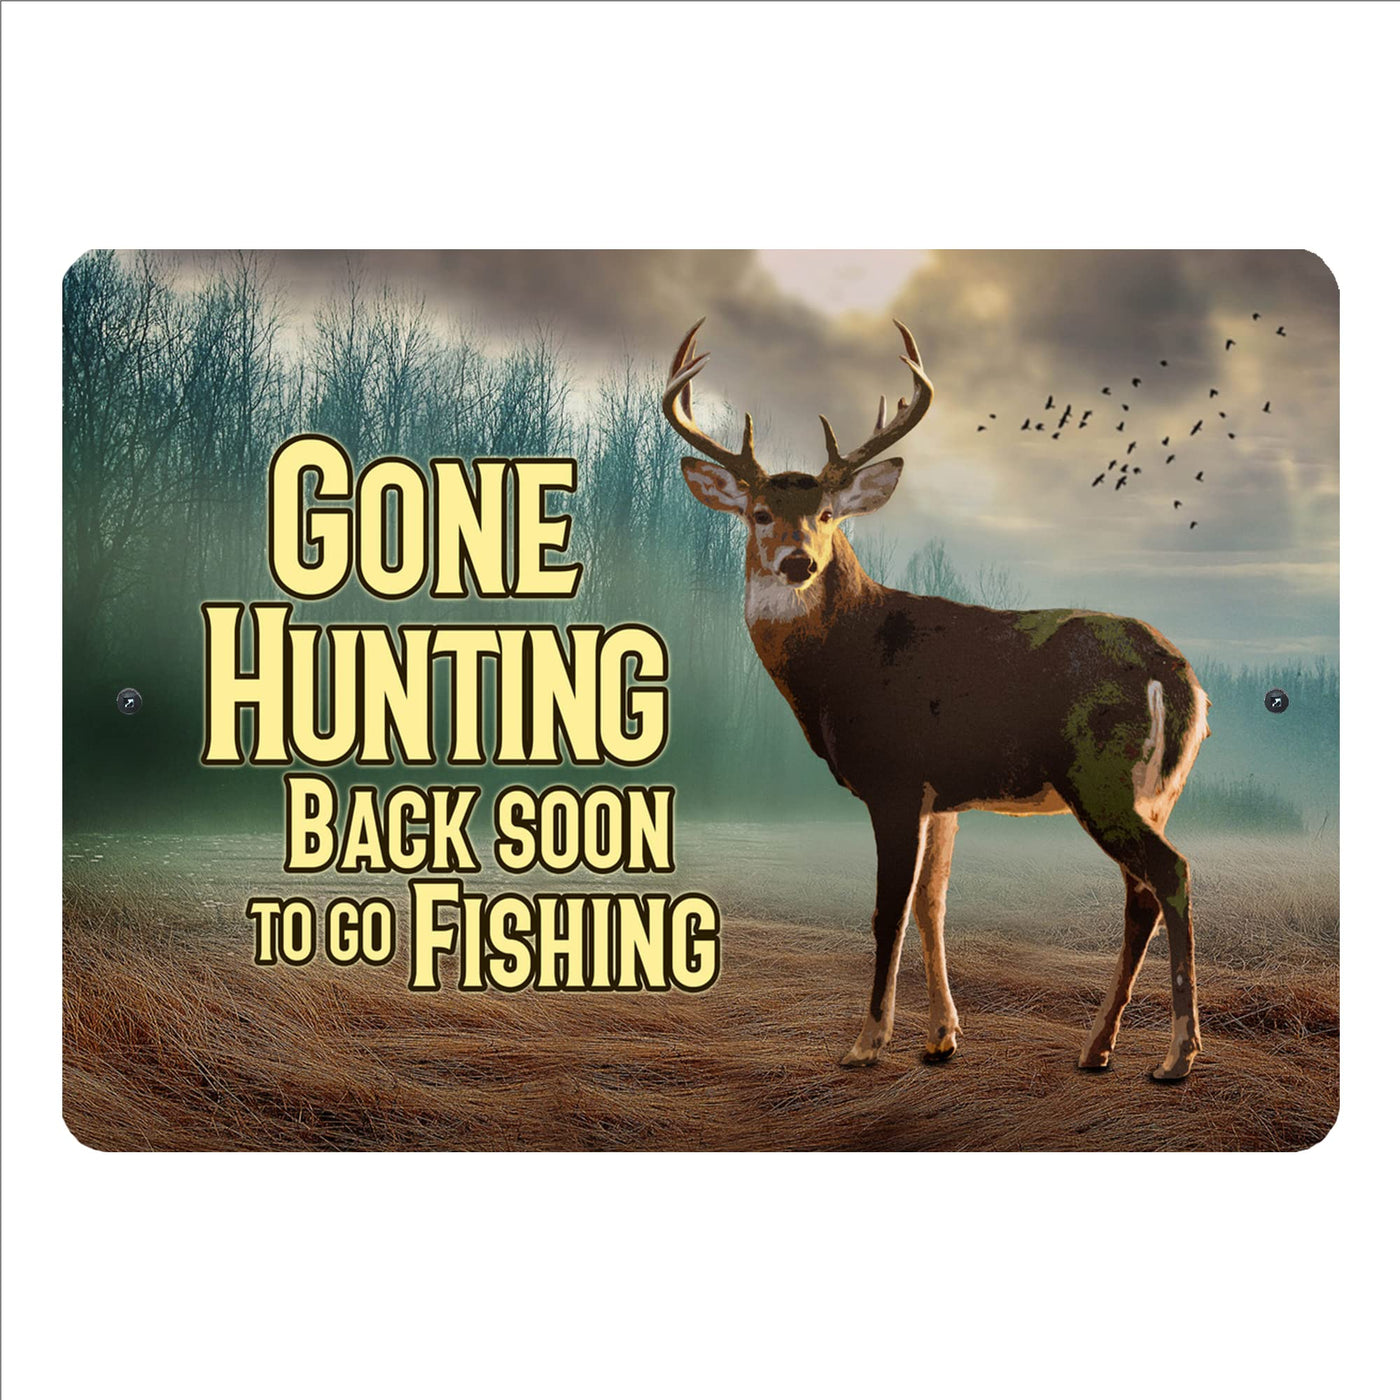 Fishing Wall Decor Rustic Cabin Hunting Fishing Signs Lake House Decor for  Home